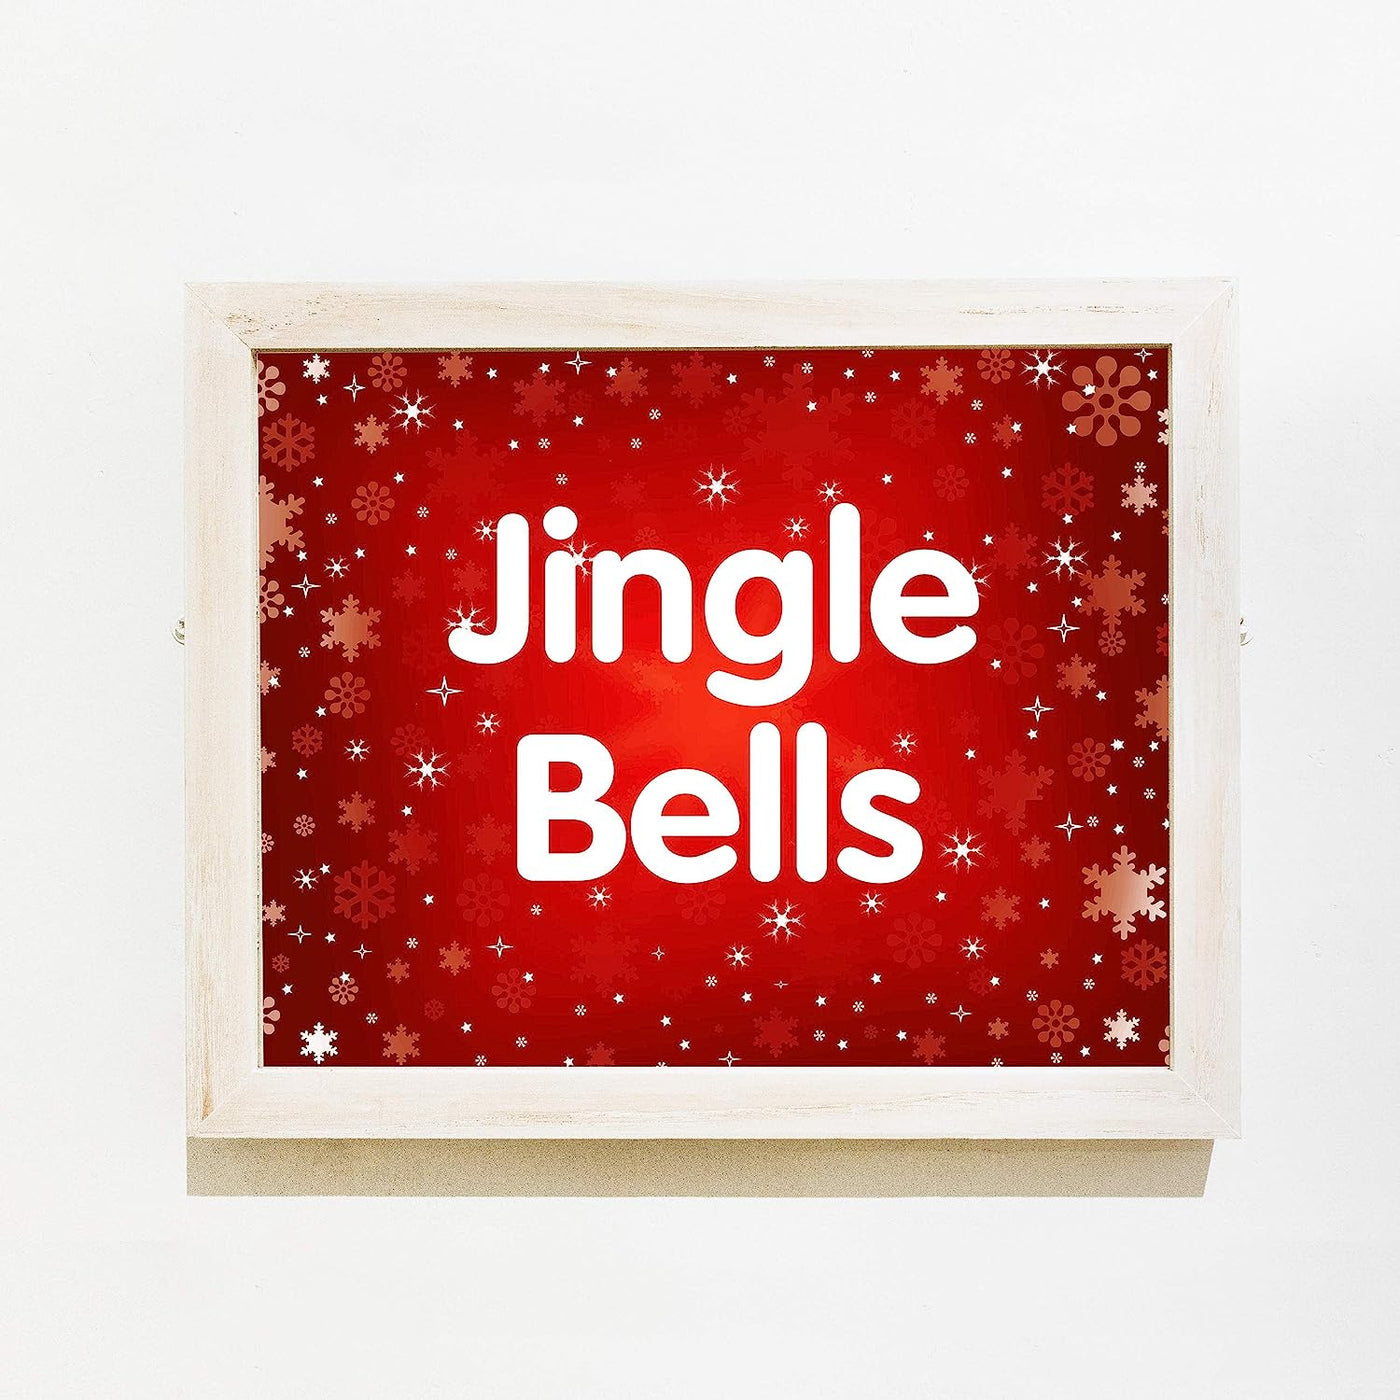 Jingle Bells Christmas Song Wall Art Decor -14 x 11" Holiday Music Wall Print -Ready to Frame. Typographic Home-Welcome-Kitchen-Farmhouse-Winter Decor. Merry Decoration-Display Your Holiday Joy!